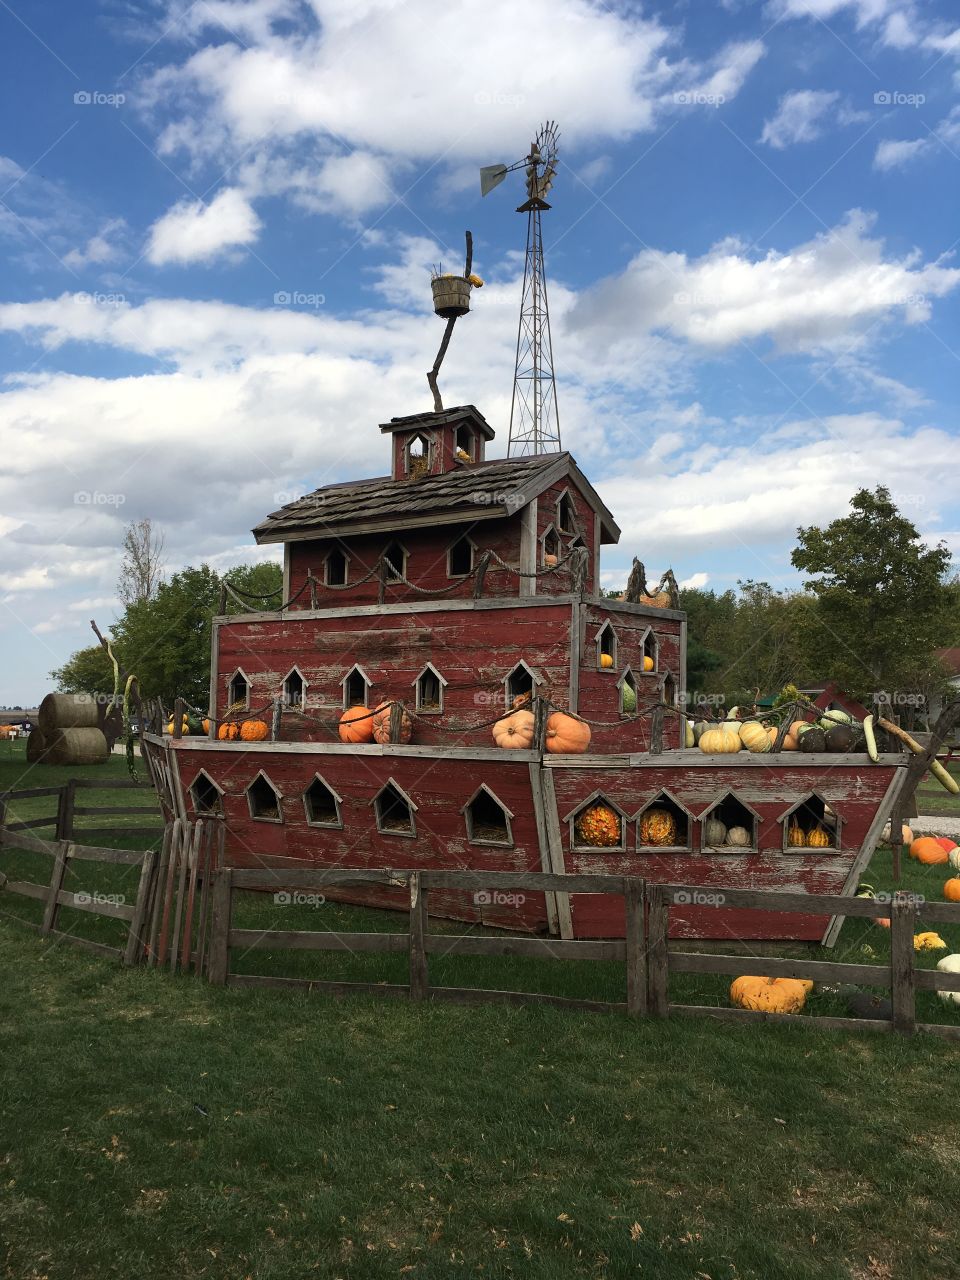 Ark of pumpkins and gourds